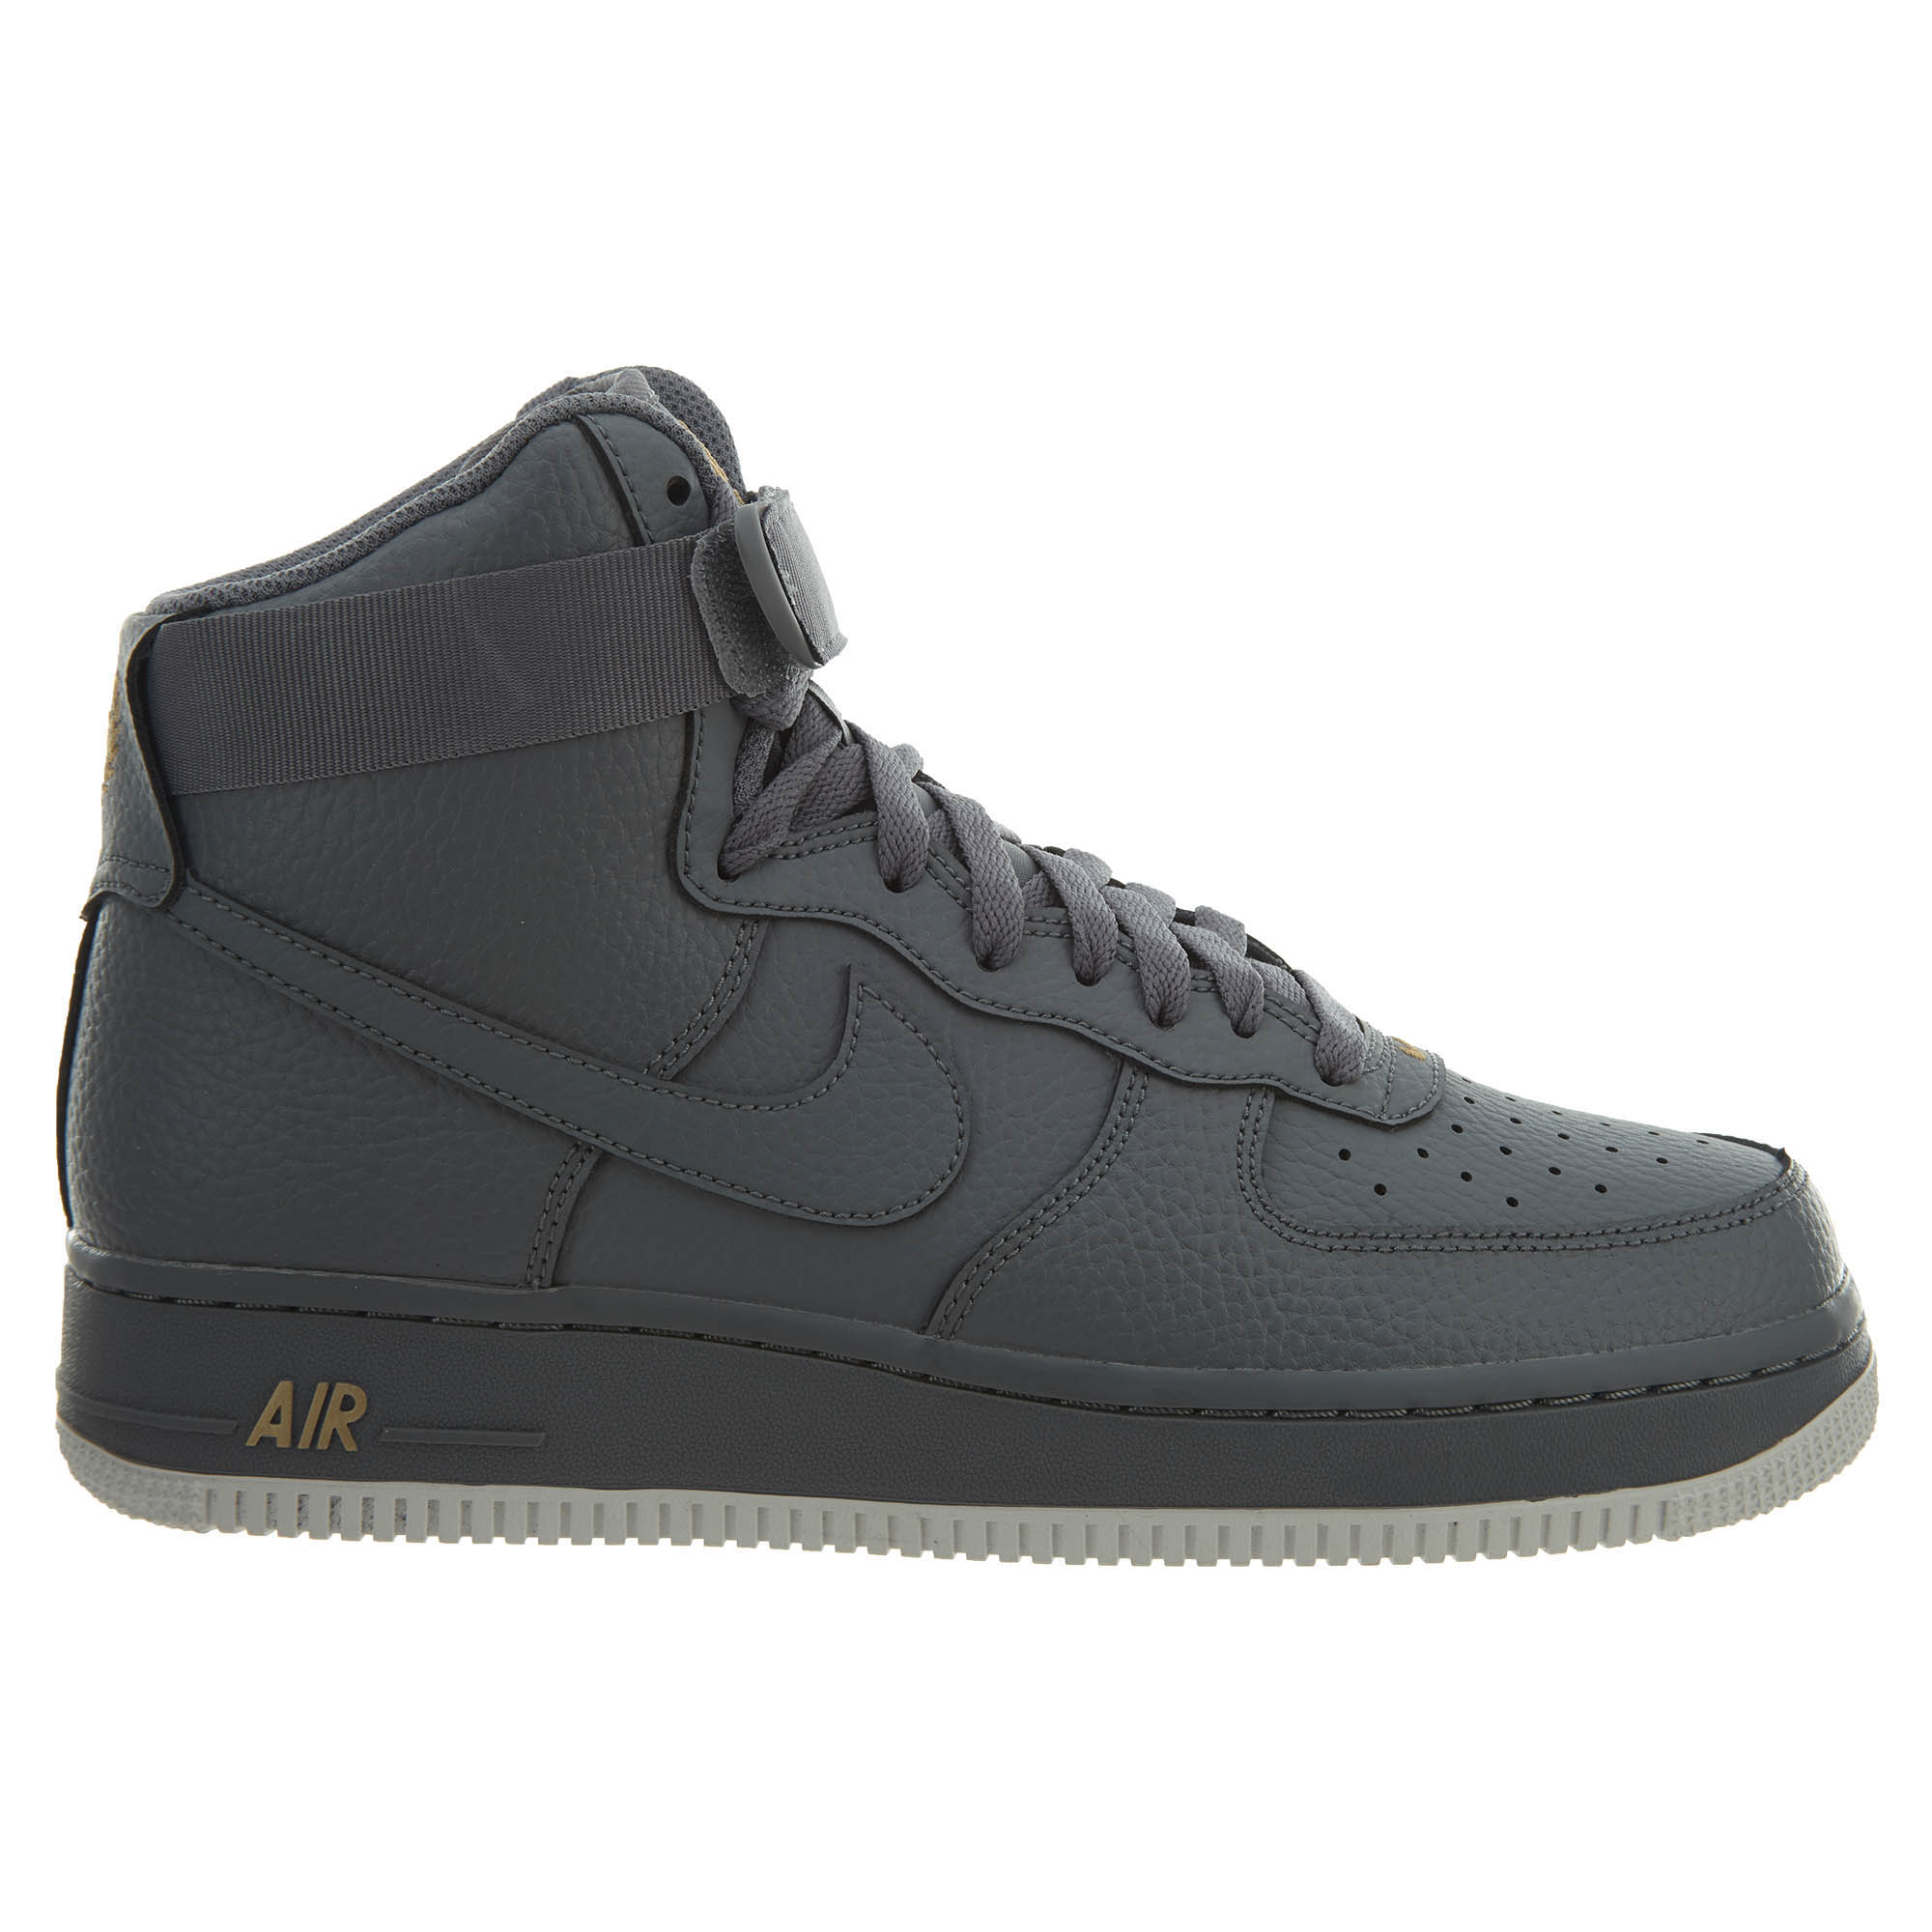 cool grey air force 1s